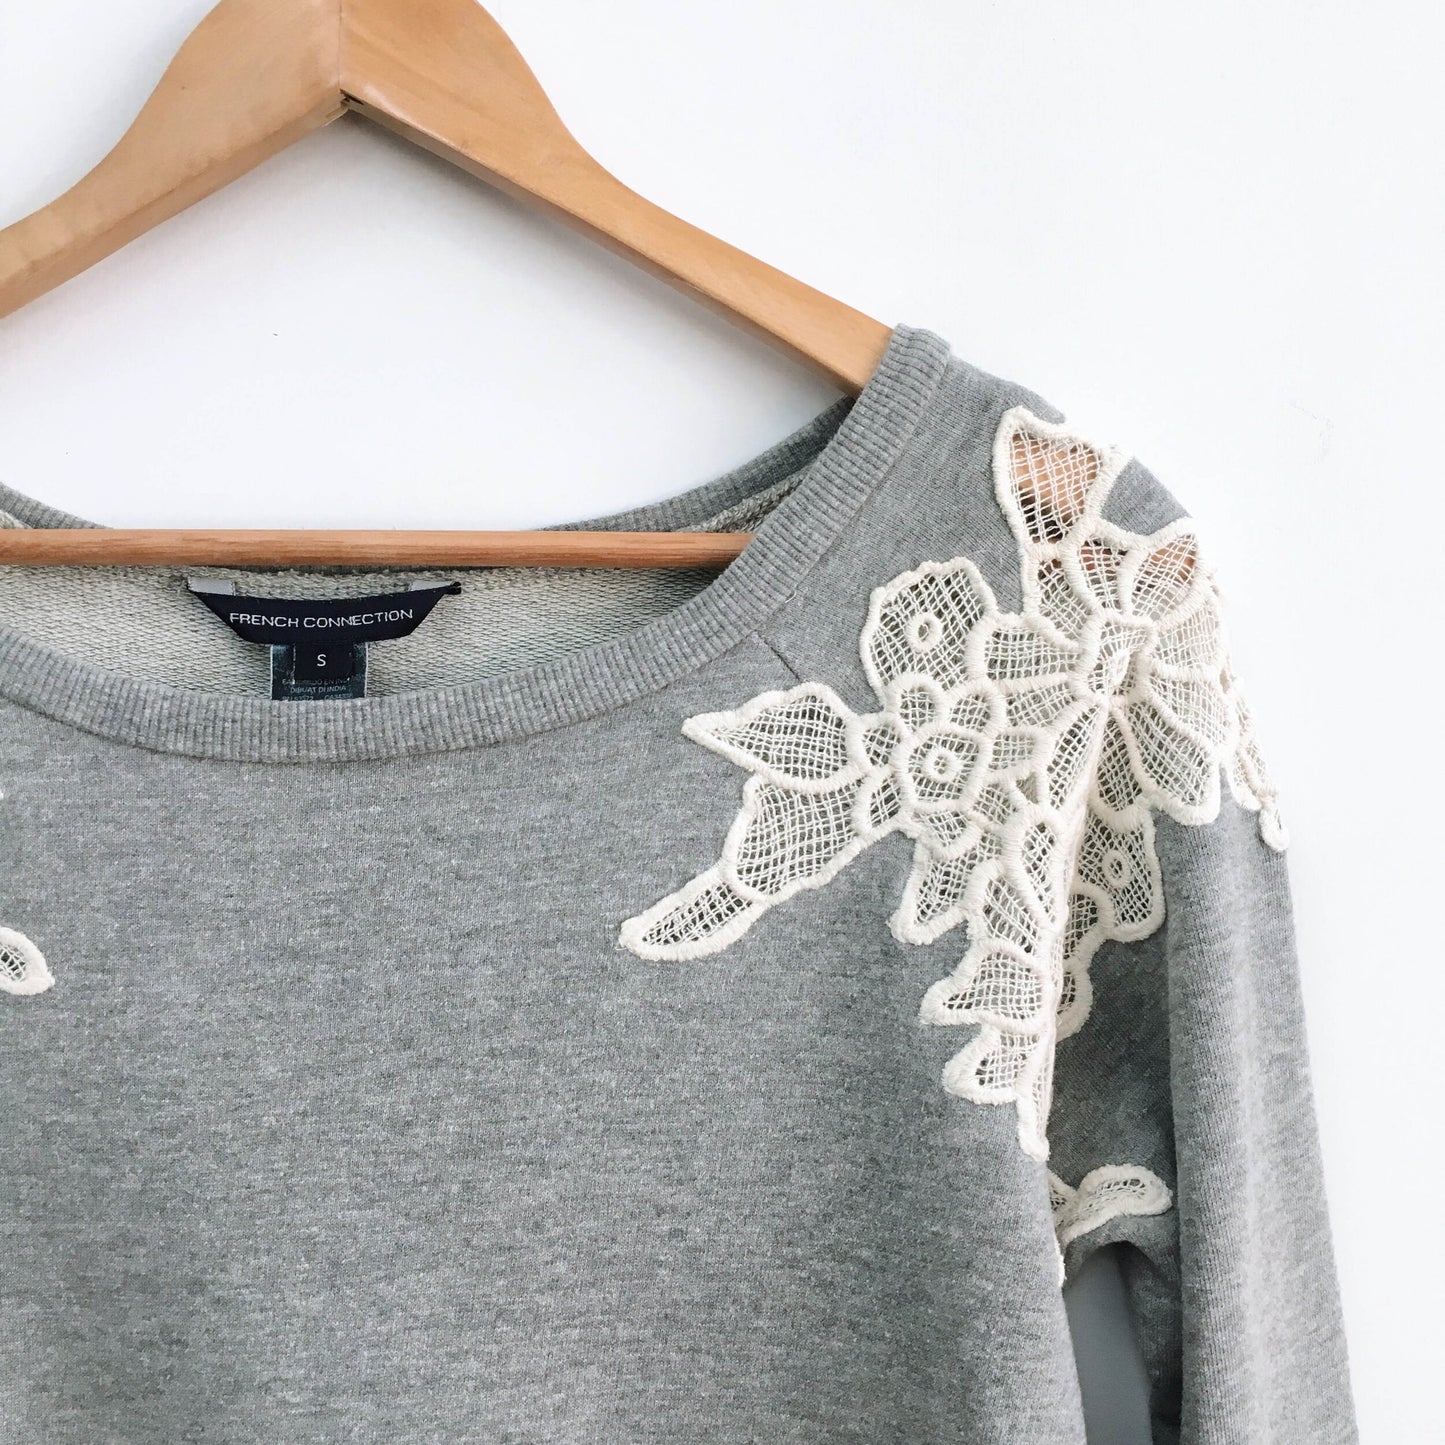 French Connection lace detail sweatshirt - size Small